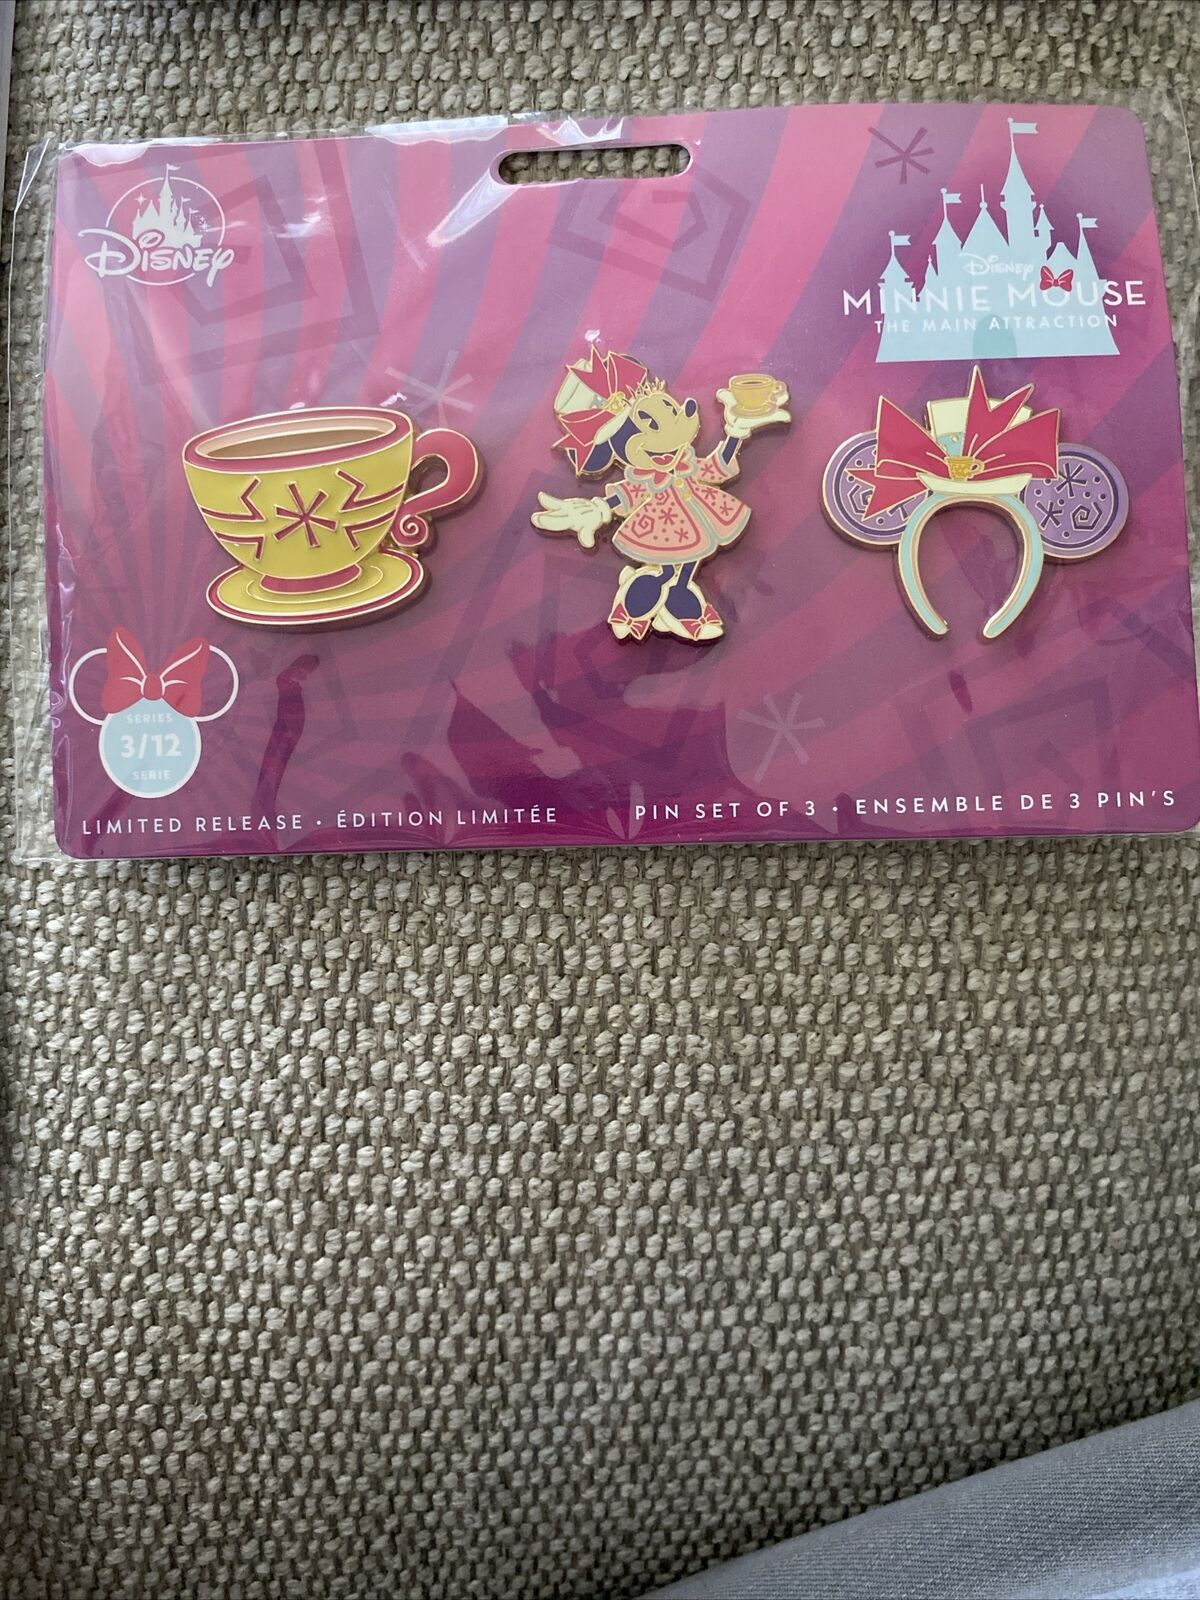 Disney Store Minnie Main Attraction Mad Hatters Tea Party March Pin Set Of 3 NWT